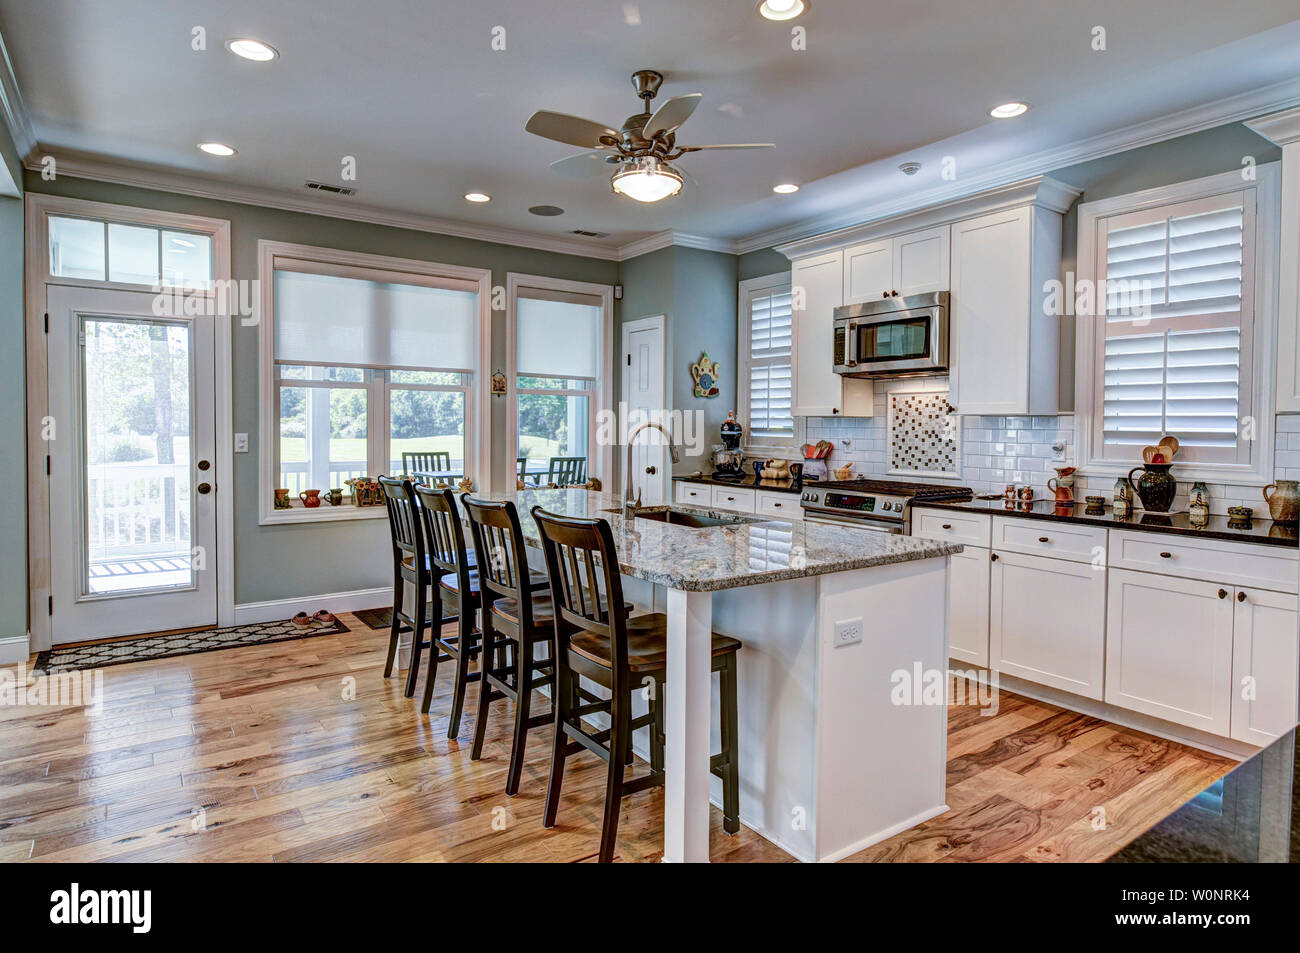 Beautiful kitchen remodel with granite countertops, stainless appliances and hardwood floors. Stock Photo